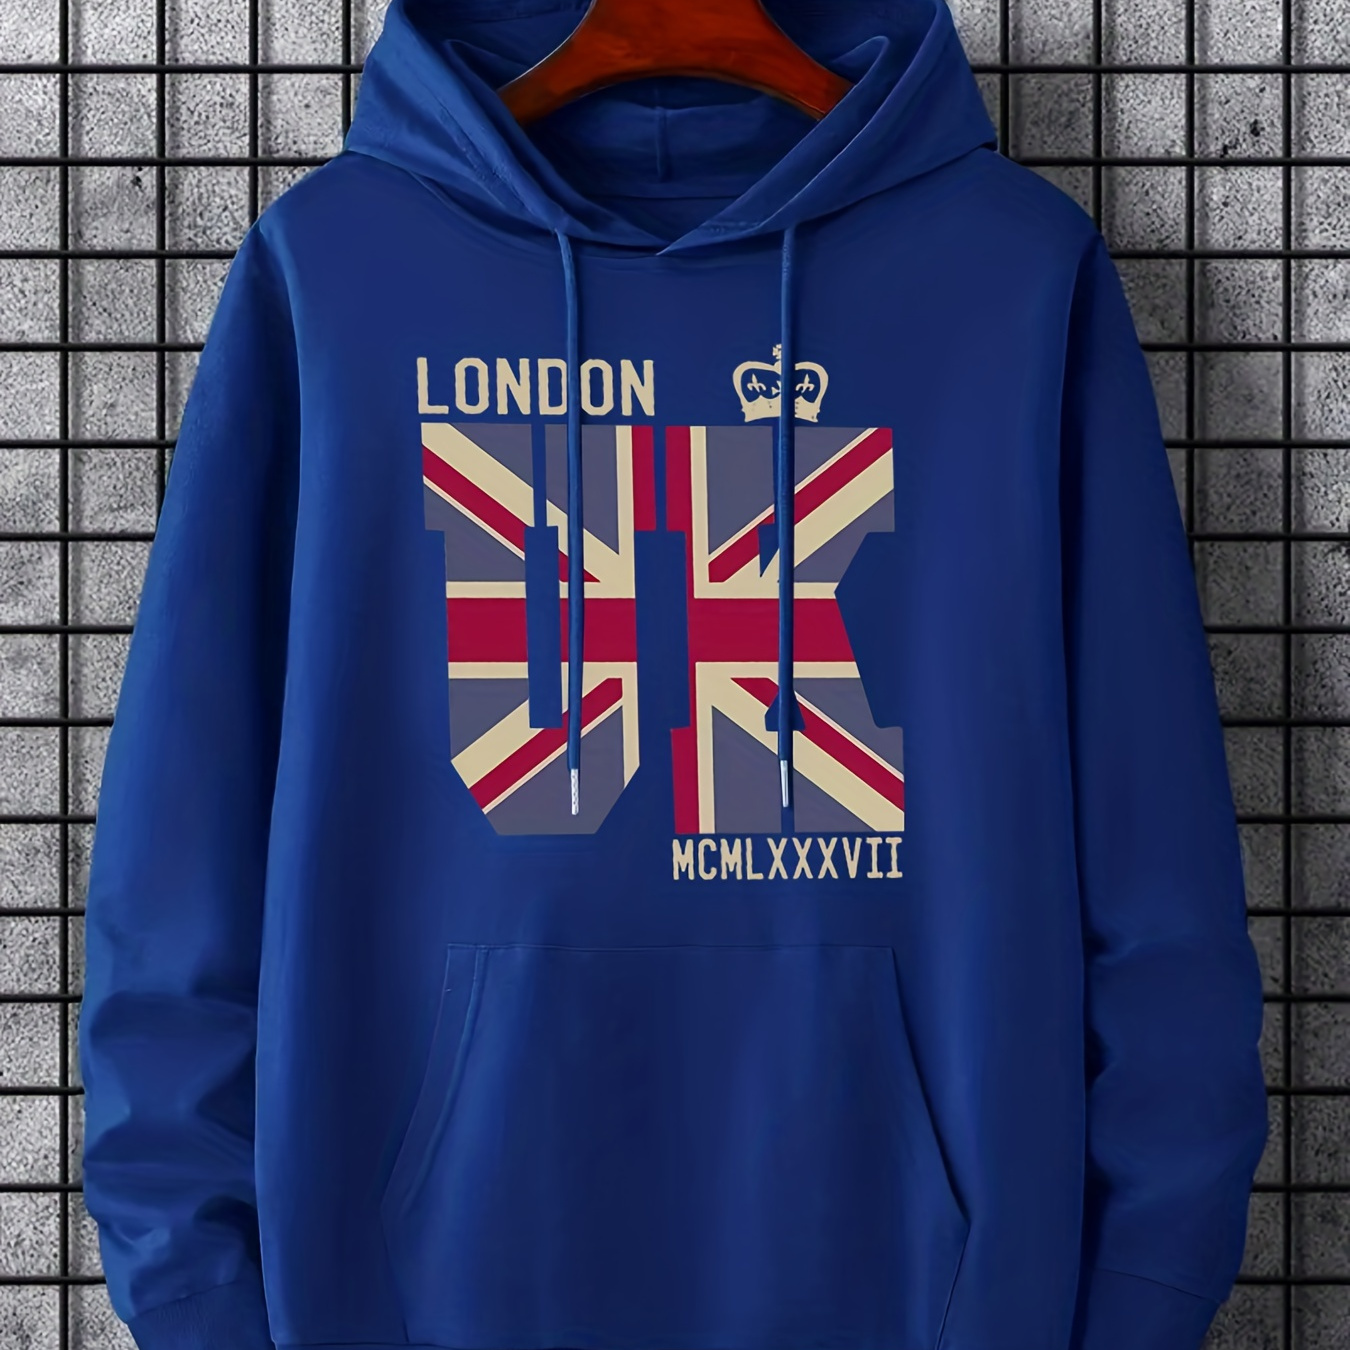 

Men's Hoodie: Creativelondon Uk Flag Print, Casual Pullover Hooded Sweatshirt With Kangaroo Pocket For Spring Fall, Top For British Team Sports Fans